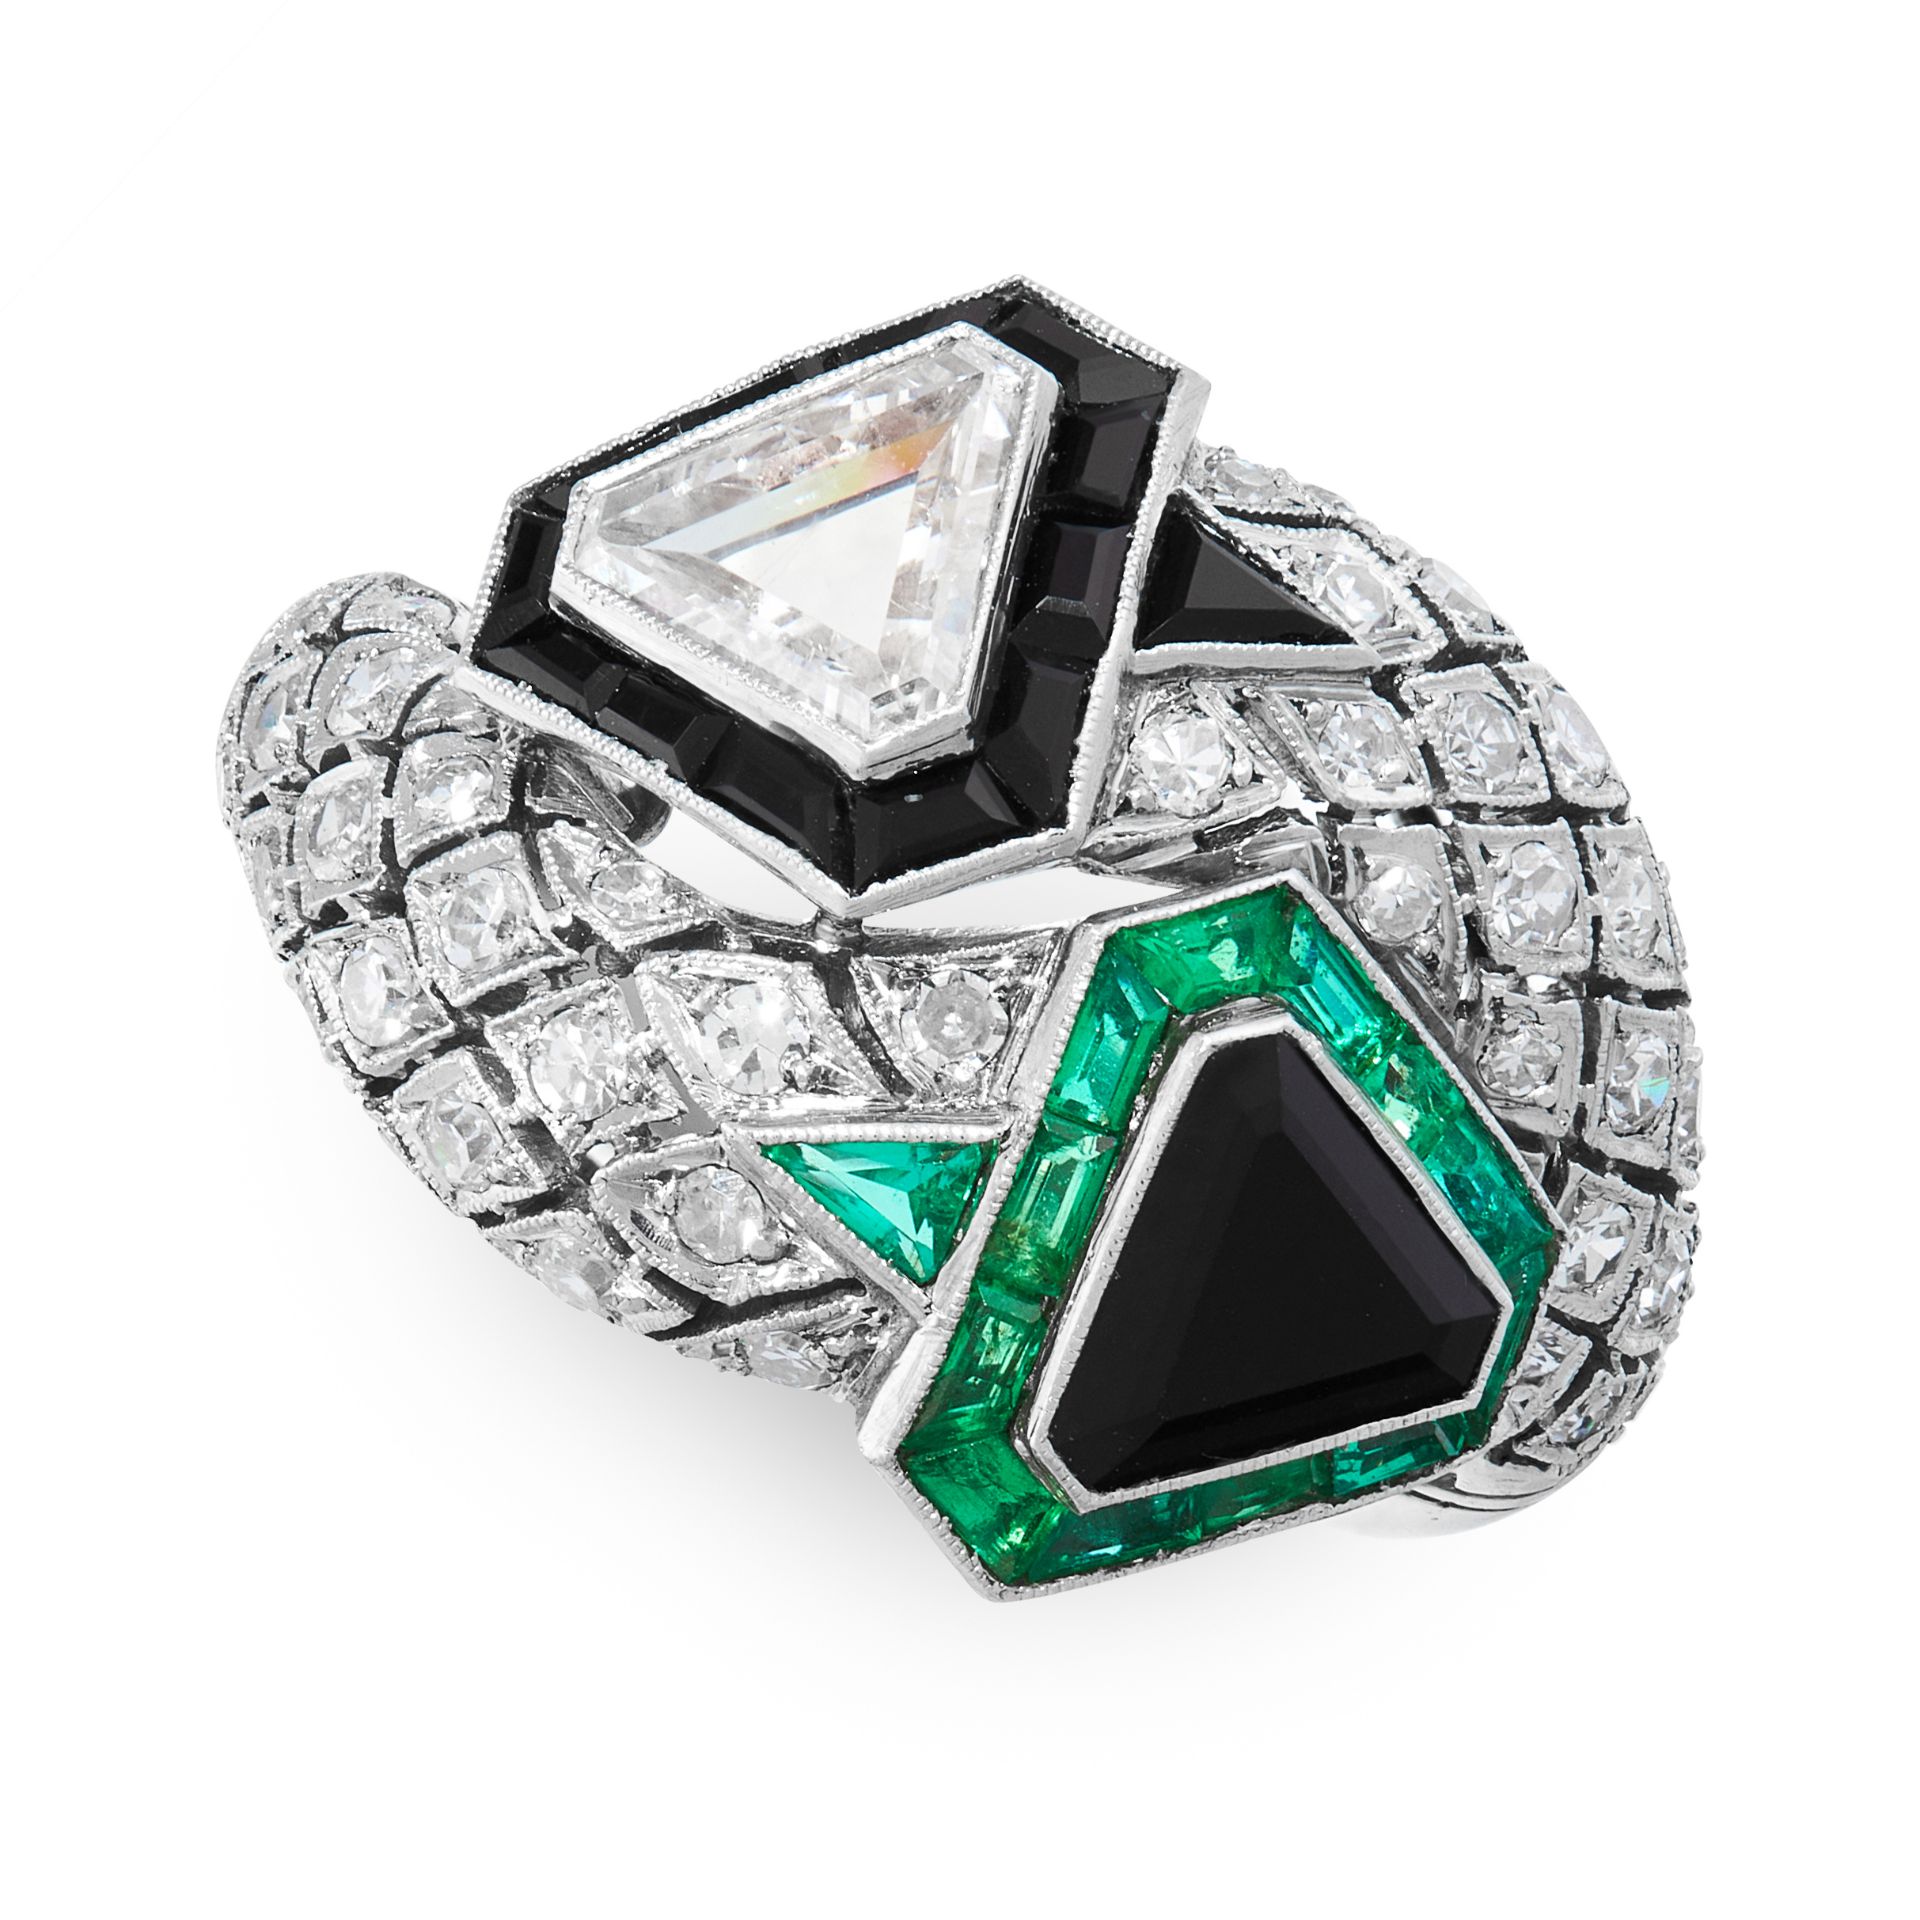 AN ART DECO DIAMOND, EMERALD AND ONYX DRESS RING, EARLY 20TH CENTURY the stylised band set at either